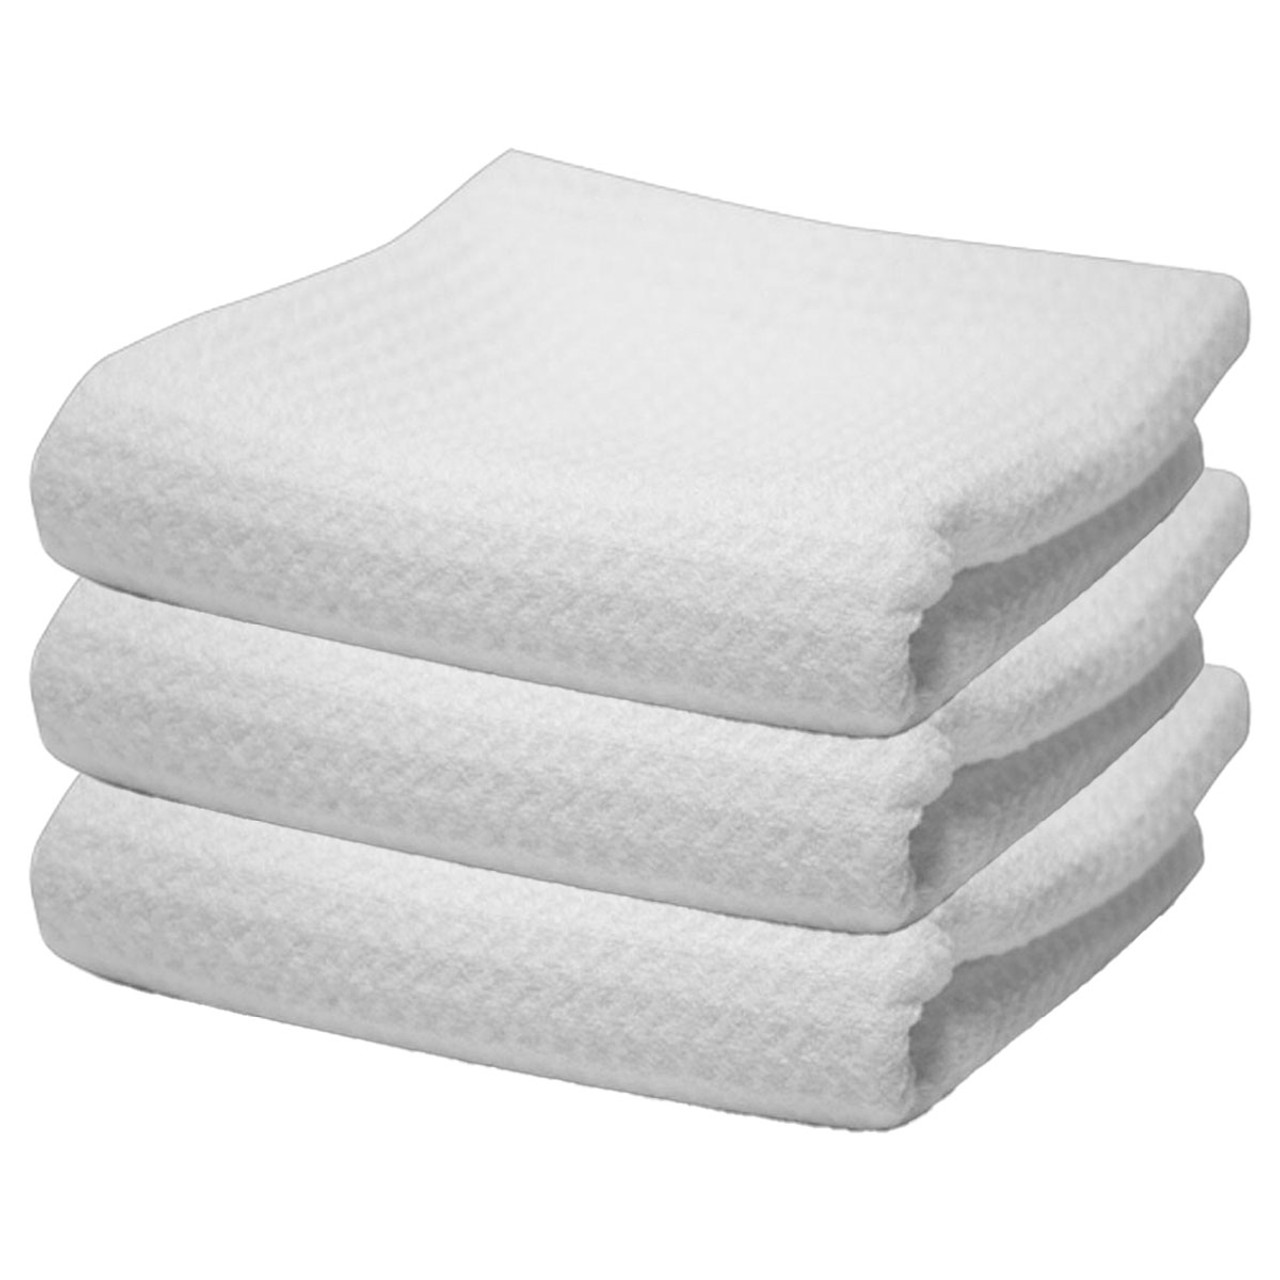 The Cobra Waffle Weave Microfiber Glass Towel cleans & buffs glass to  crystal clarity with the soft texture of genuine Cobra microfiber.